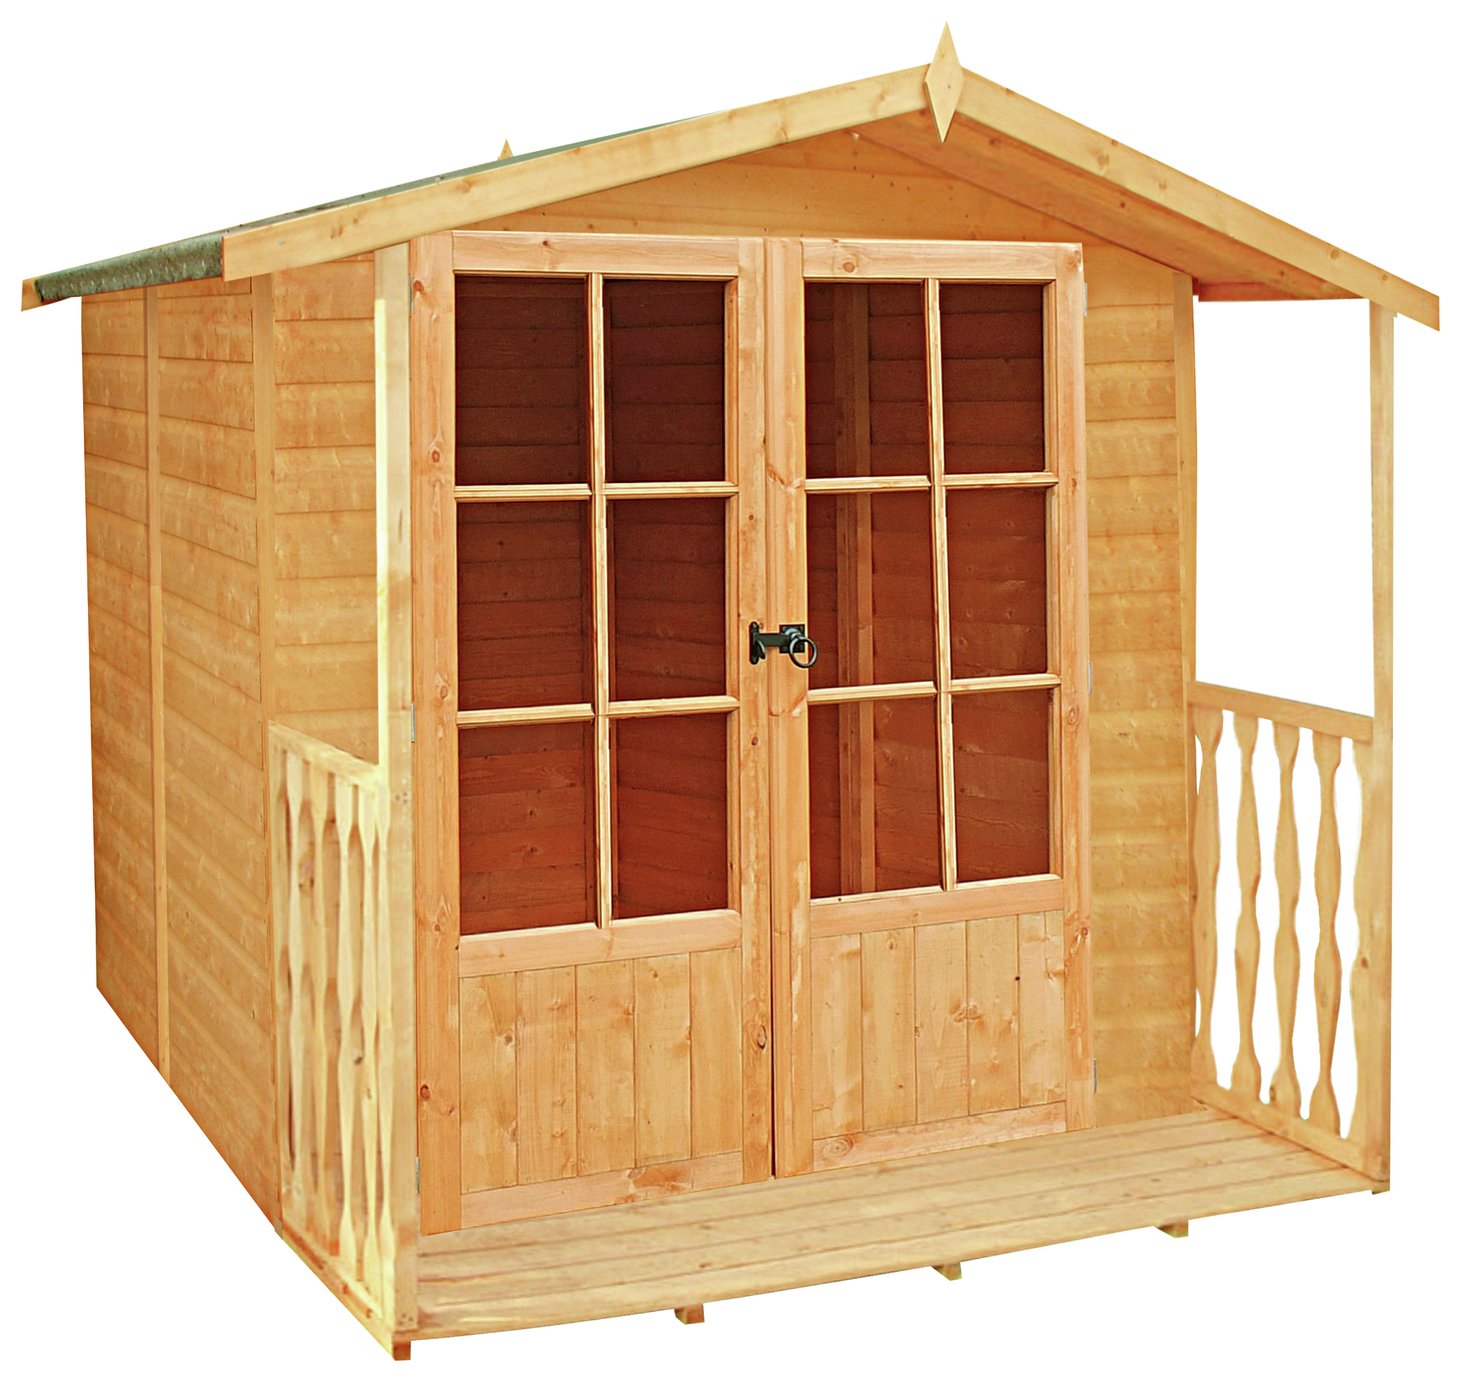 Homewood Alnwick Summerhouse 7 x 7ft. at Argos review